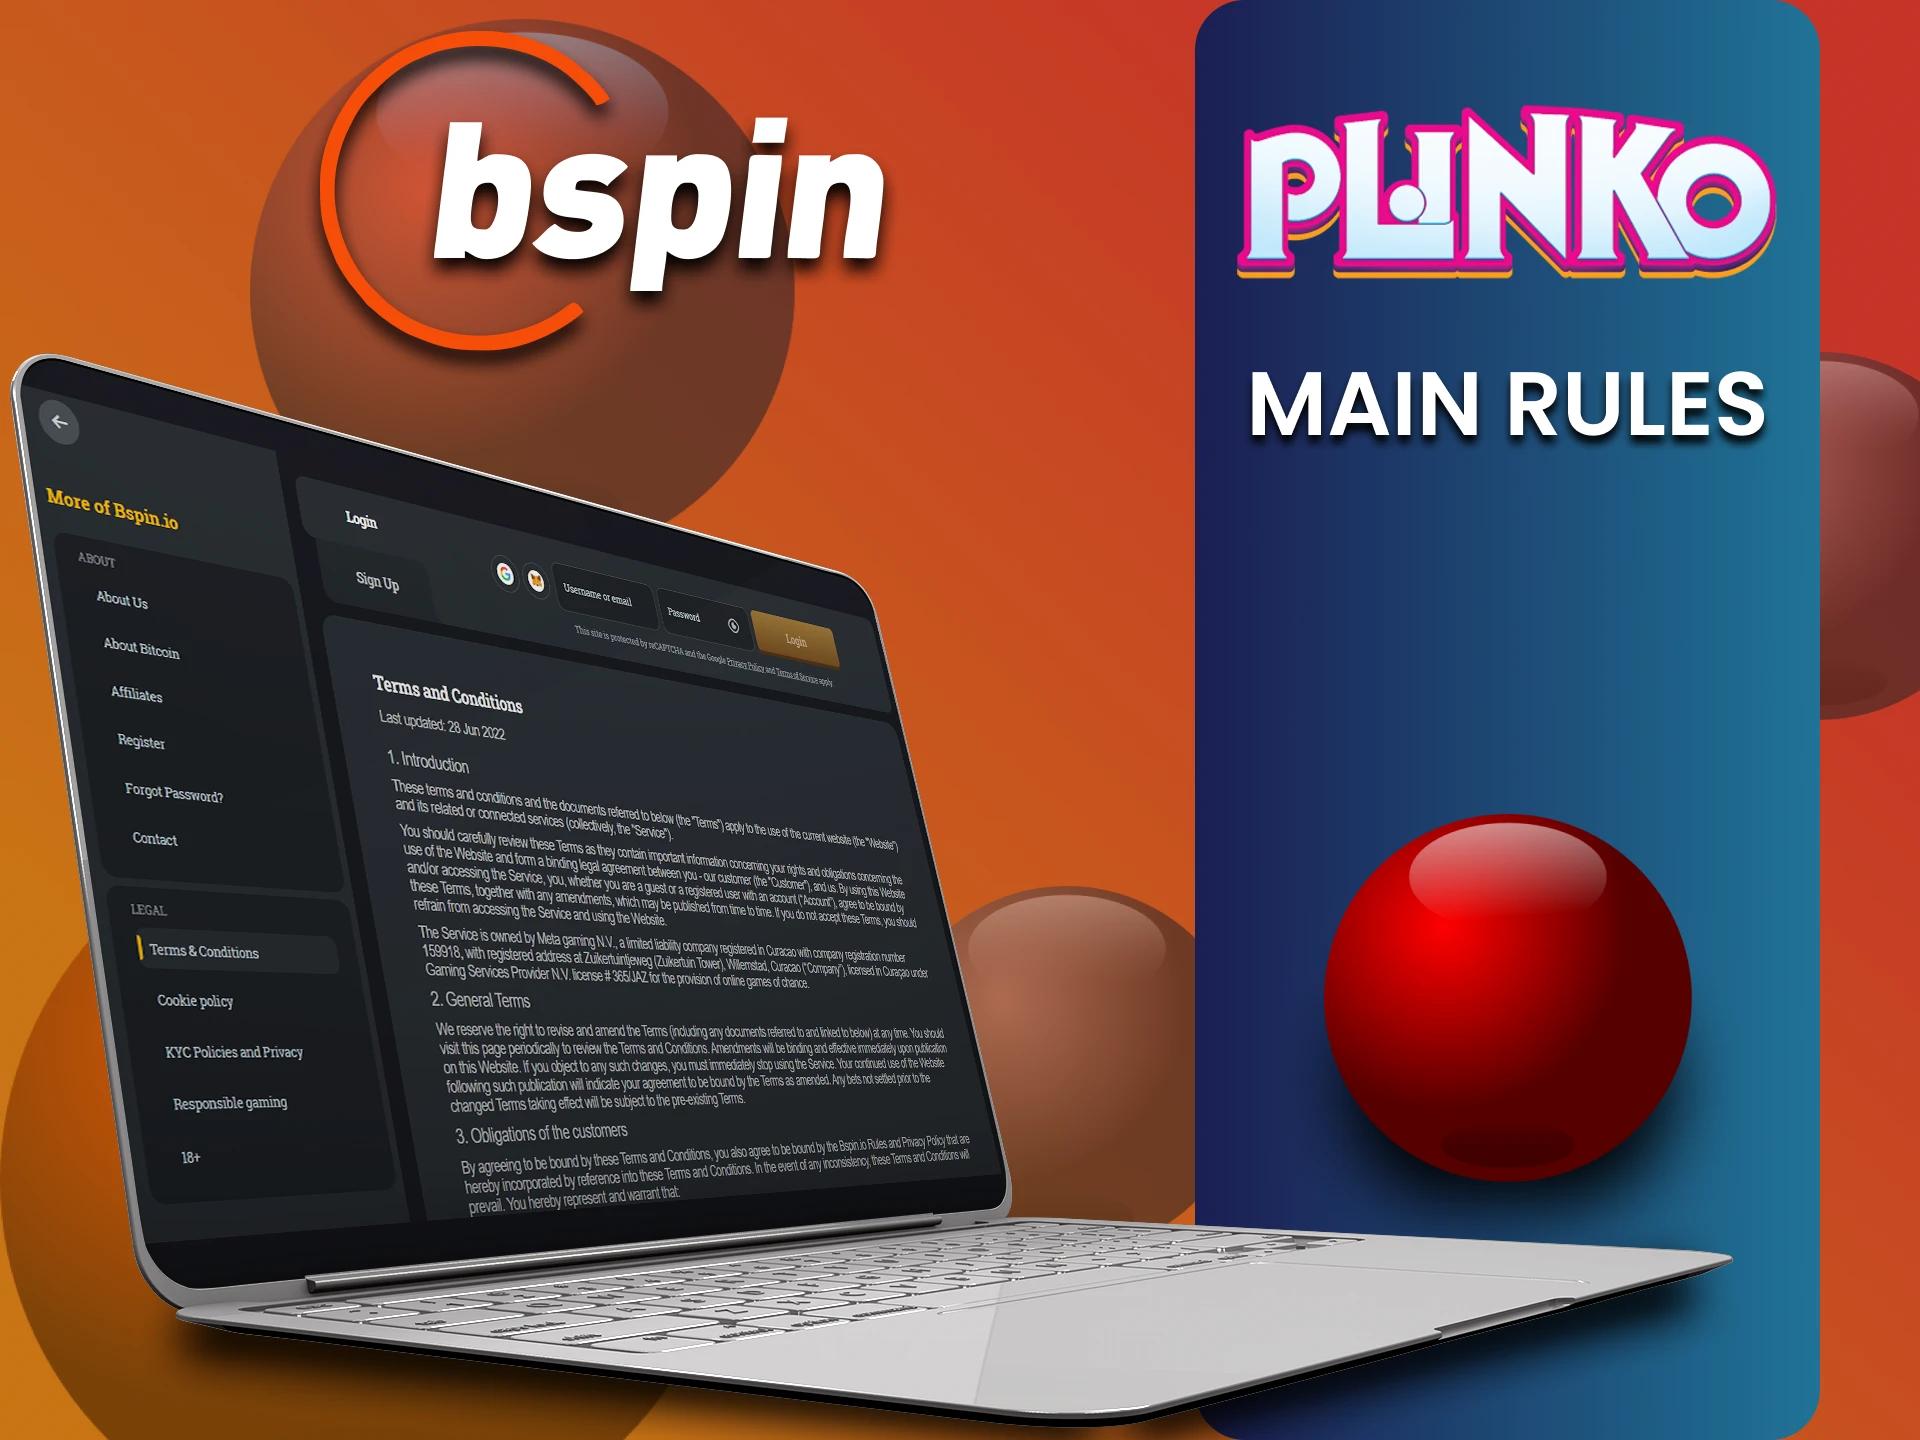 The Bspin website has specific rules for playing Plinko.